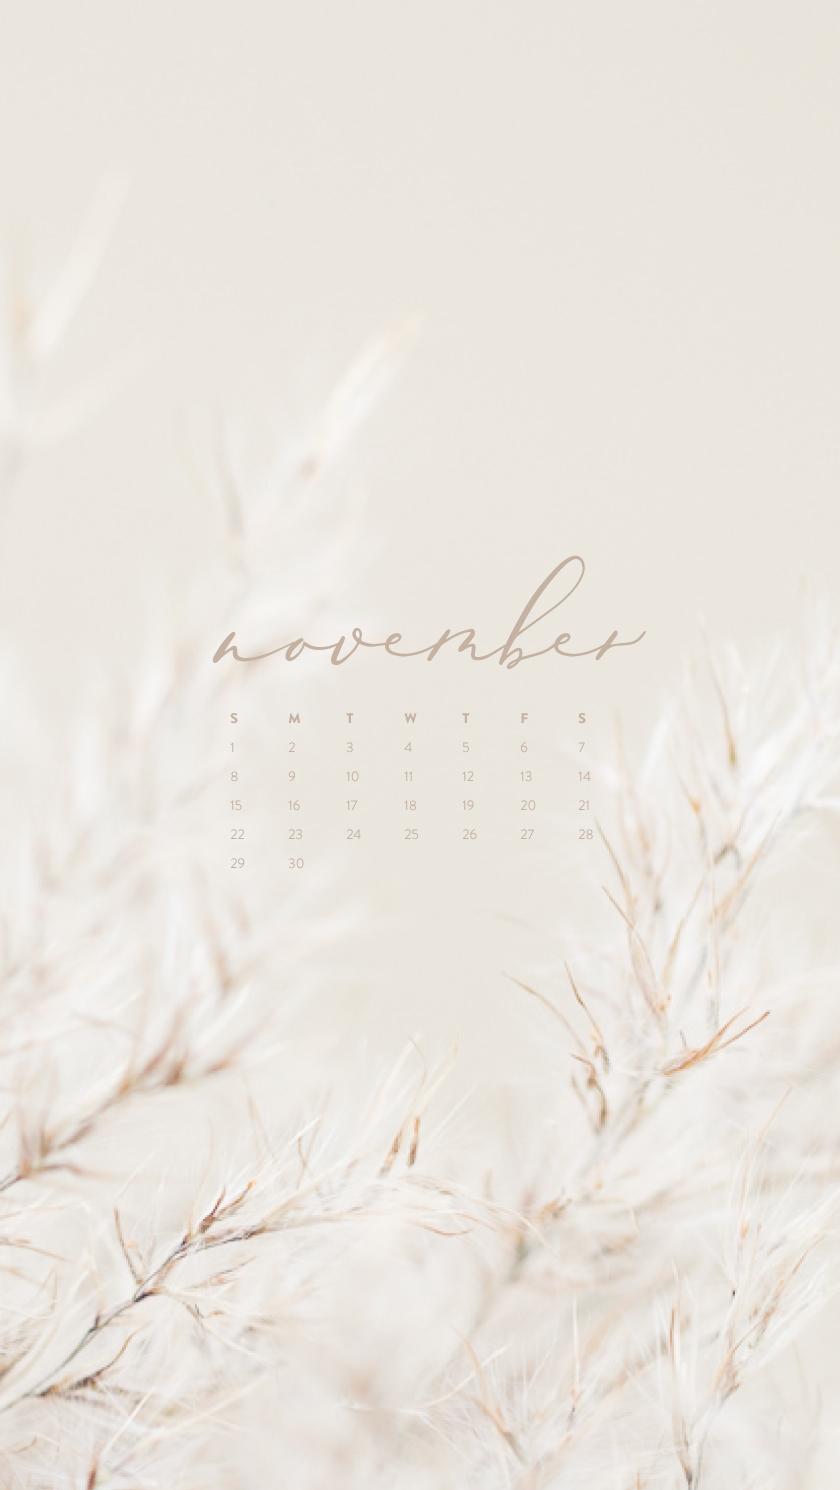 November Background For Your Phone Tablet Or